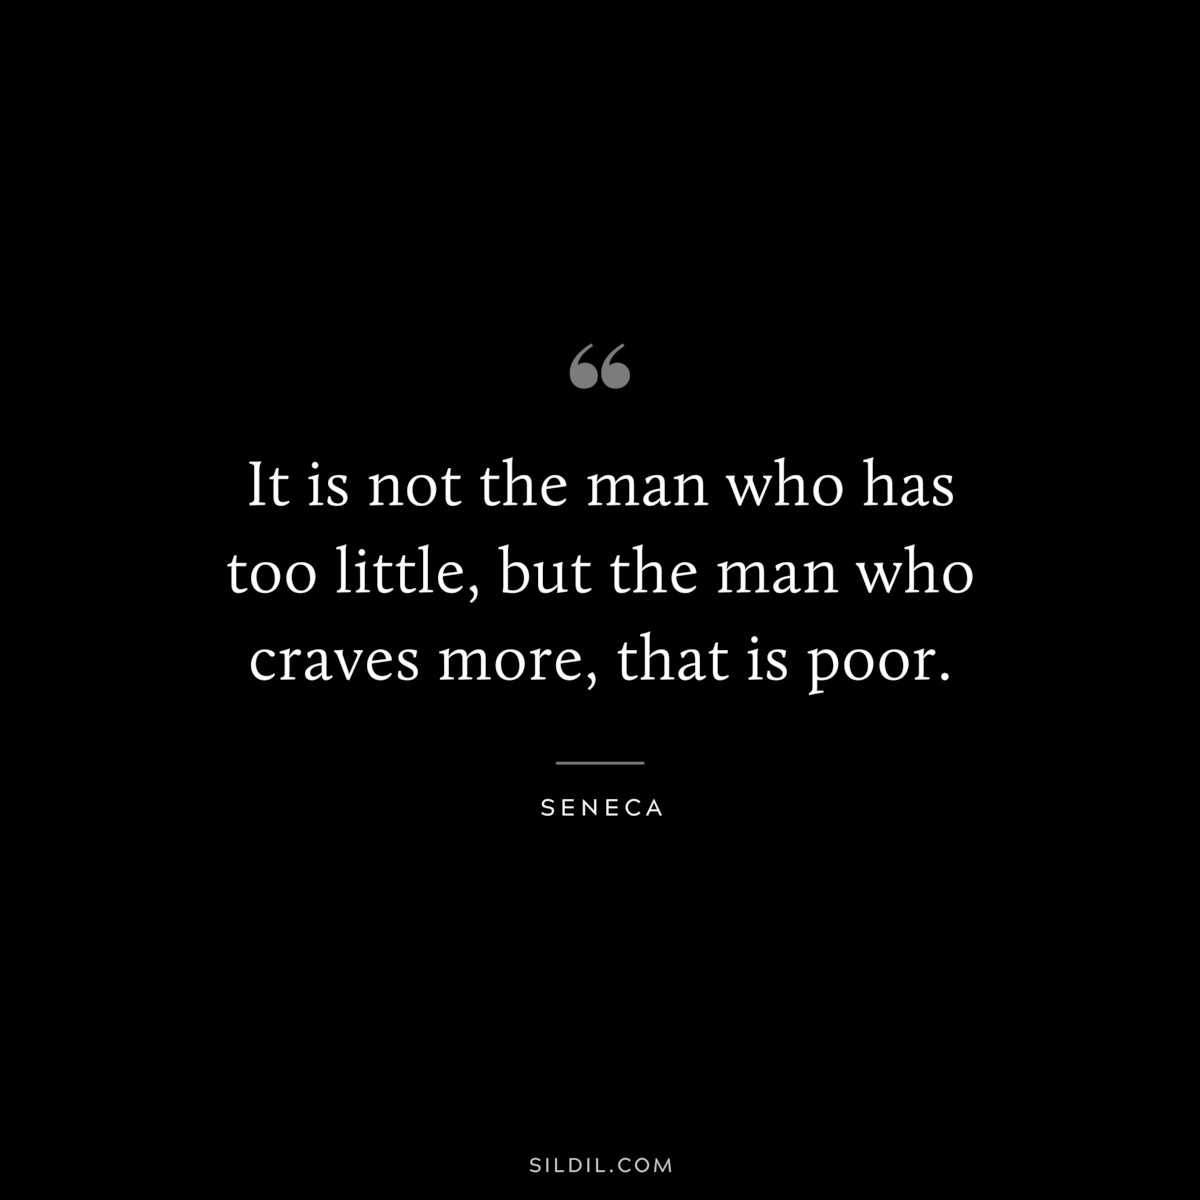 It is not the man who has too little, but the man who craves more, that is poor. ― Seneca